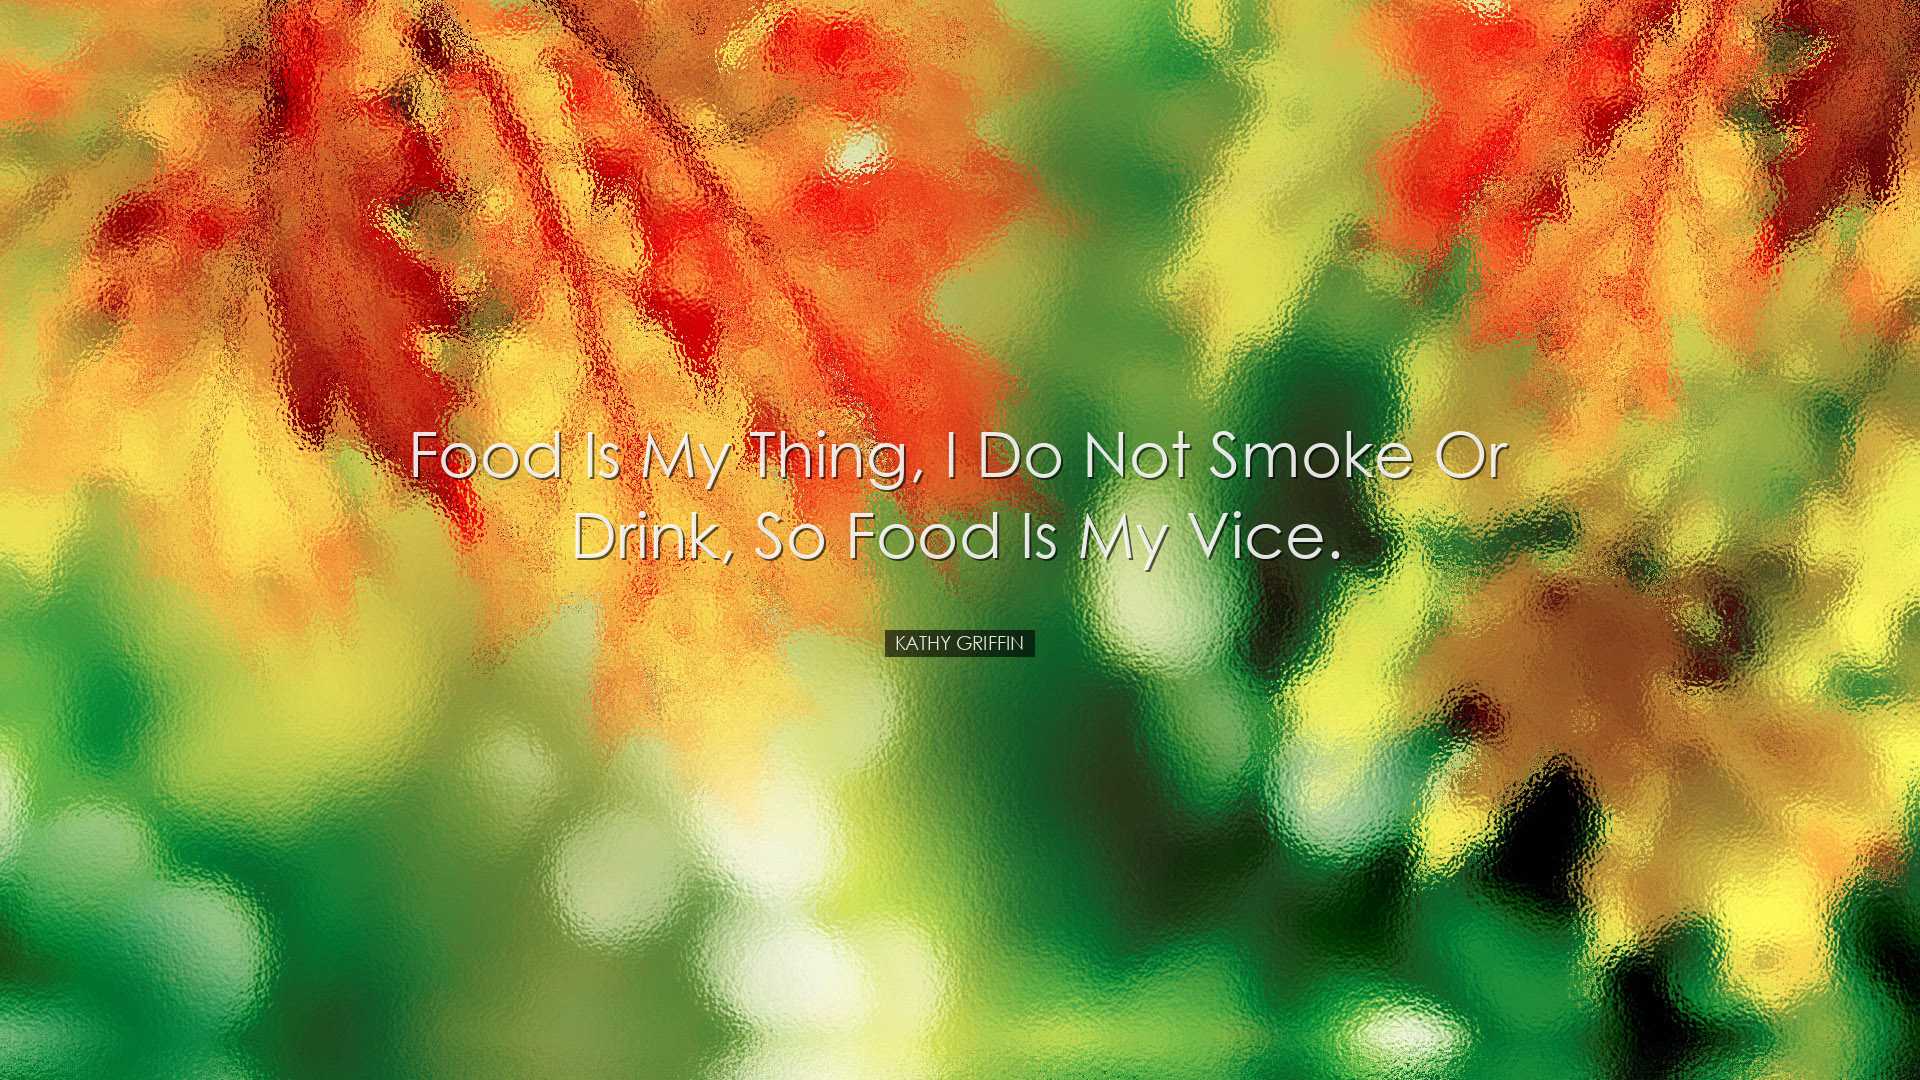 Food is my thing, I do not smoke or drink, so food is my vice. - K